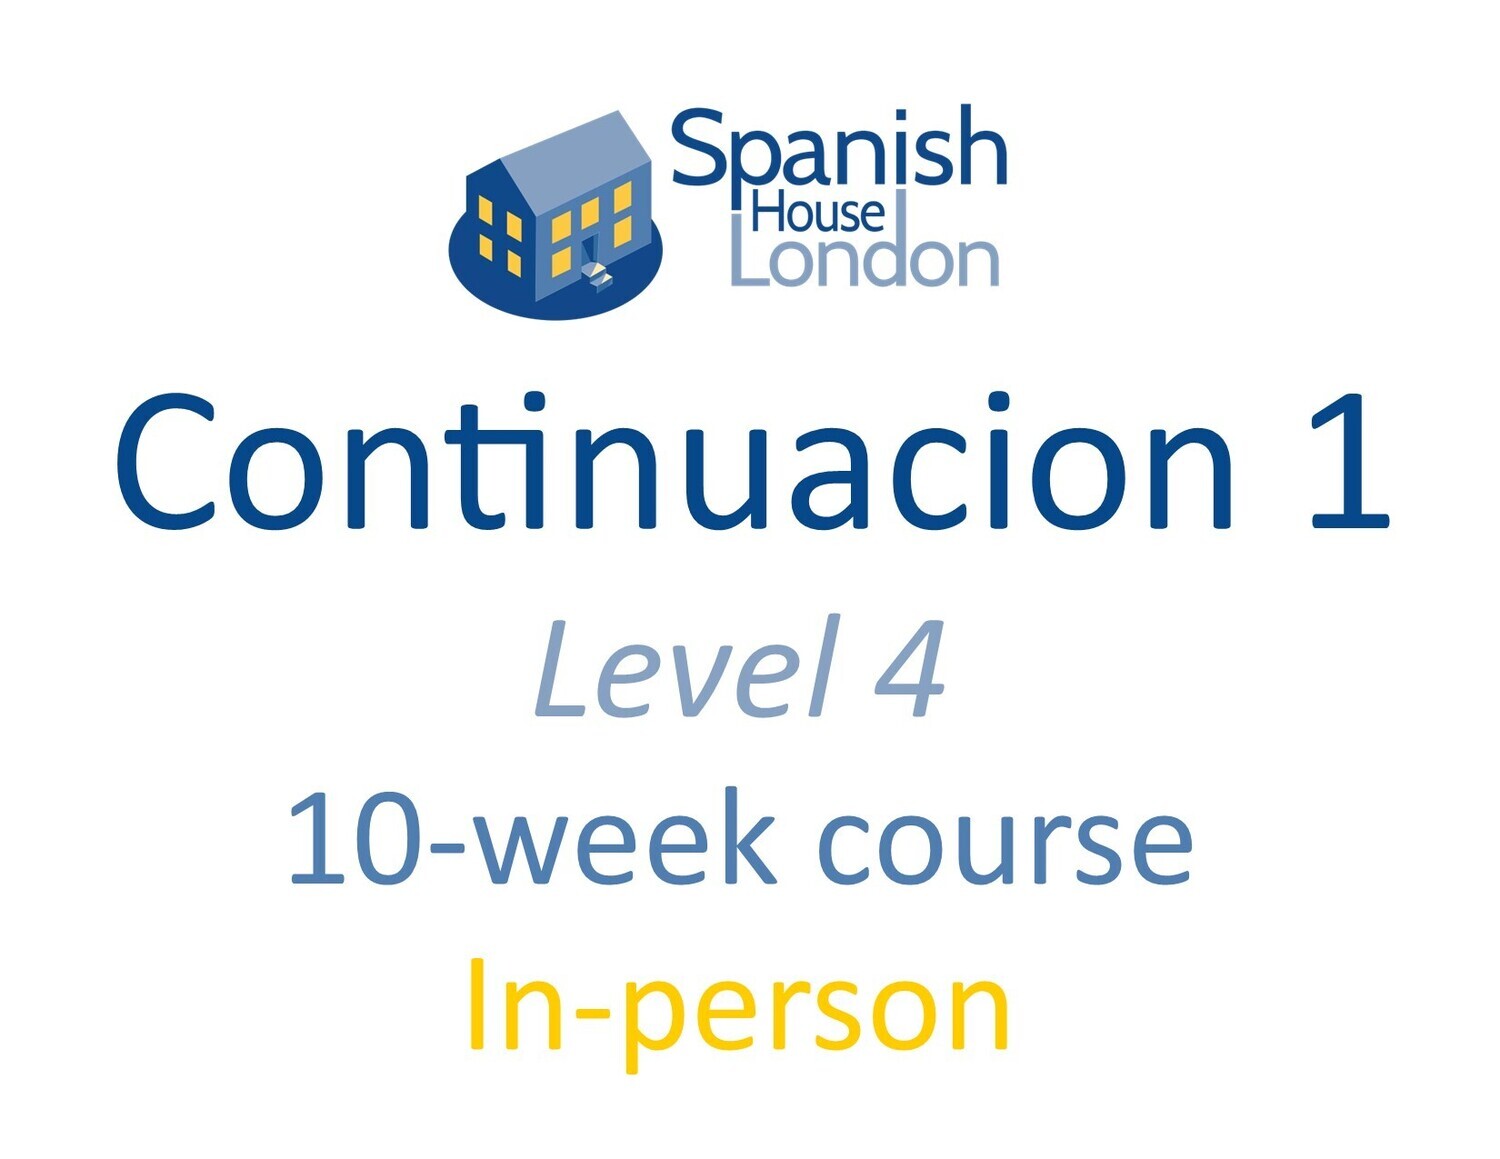 Continuacion 1 Course starting on 12th April at 7.30pm in Clapham North